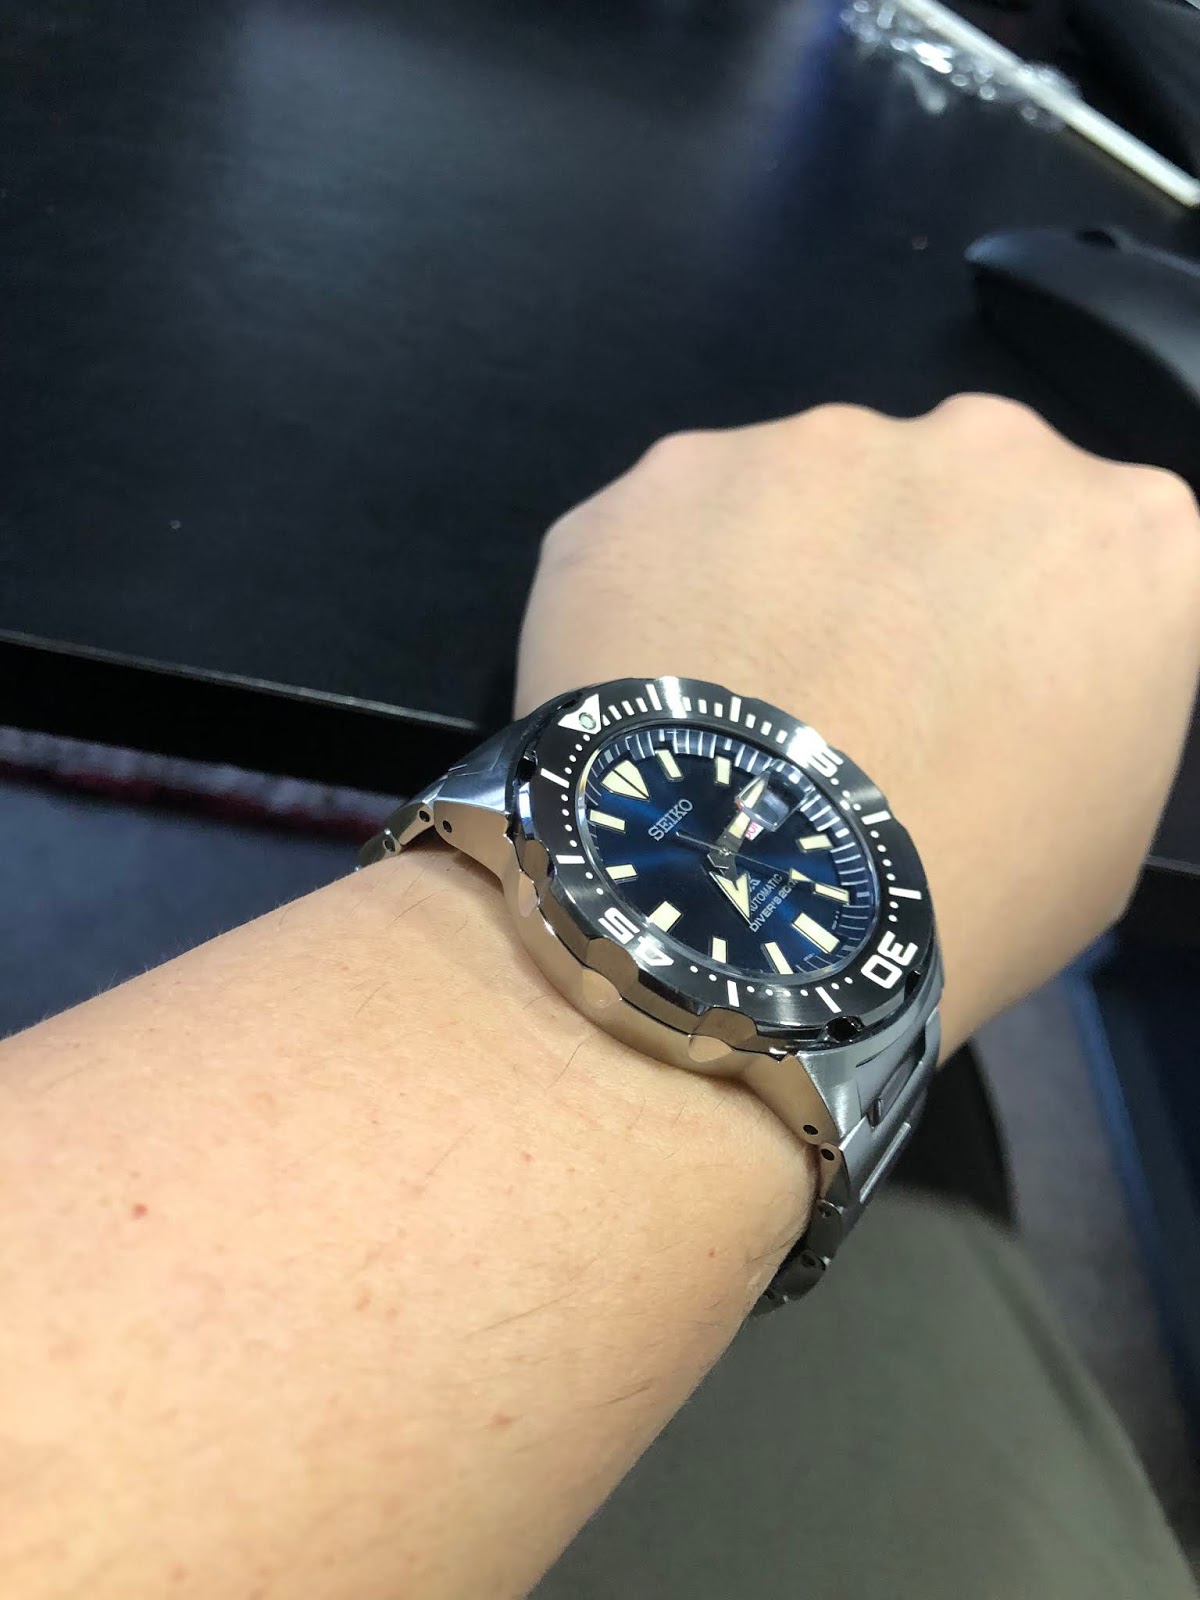 My Eastern Watch Collection: Seiko Prospex 4th Generation Monster SRPD25K1  (or SBDY033) Dive Watch (similar to SRPD27K1/SBDY035 and SRPE09K1/SBDY045)  - The Quintessential Tool-Watch, Review (plus Video)